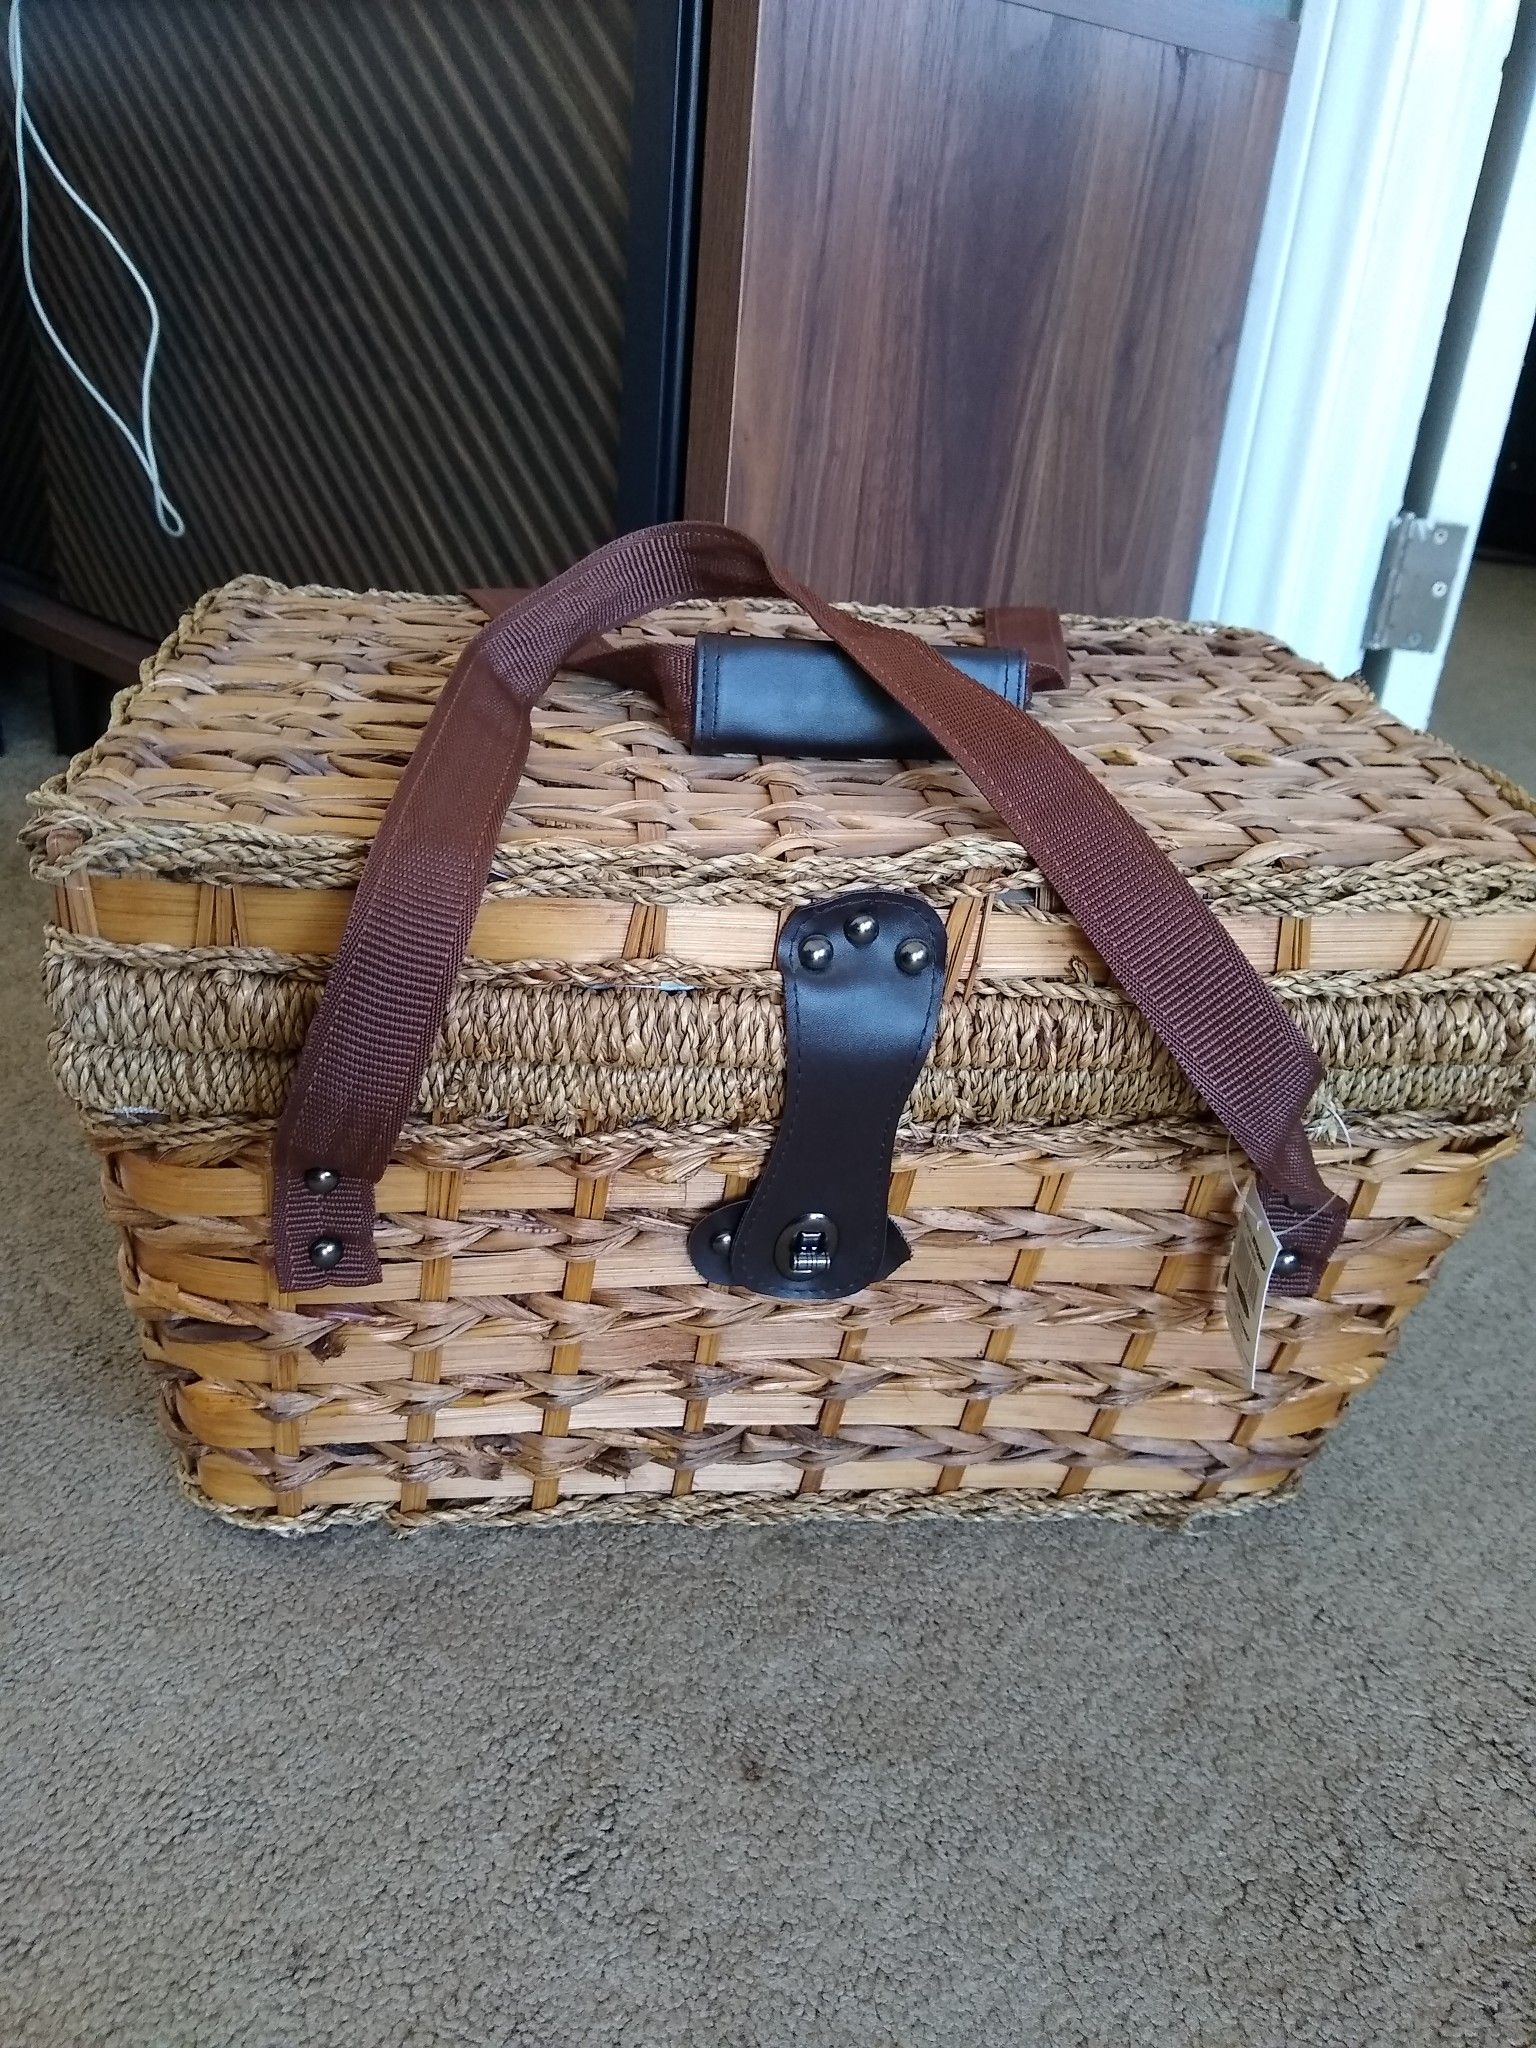 Brand new picnic basket with built in cooler